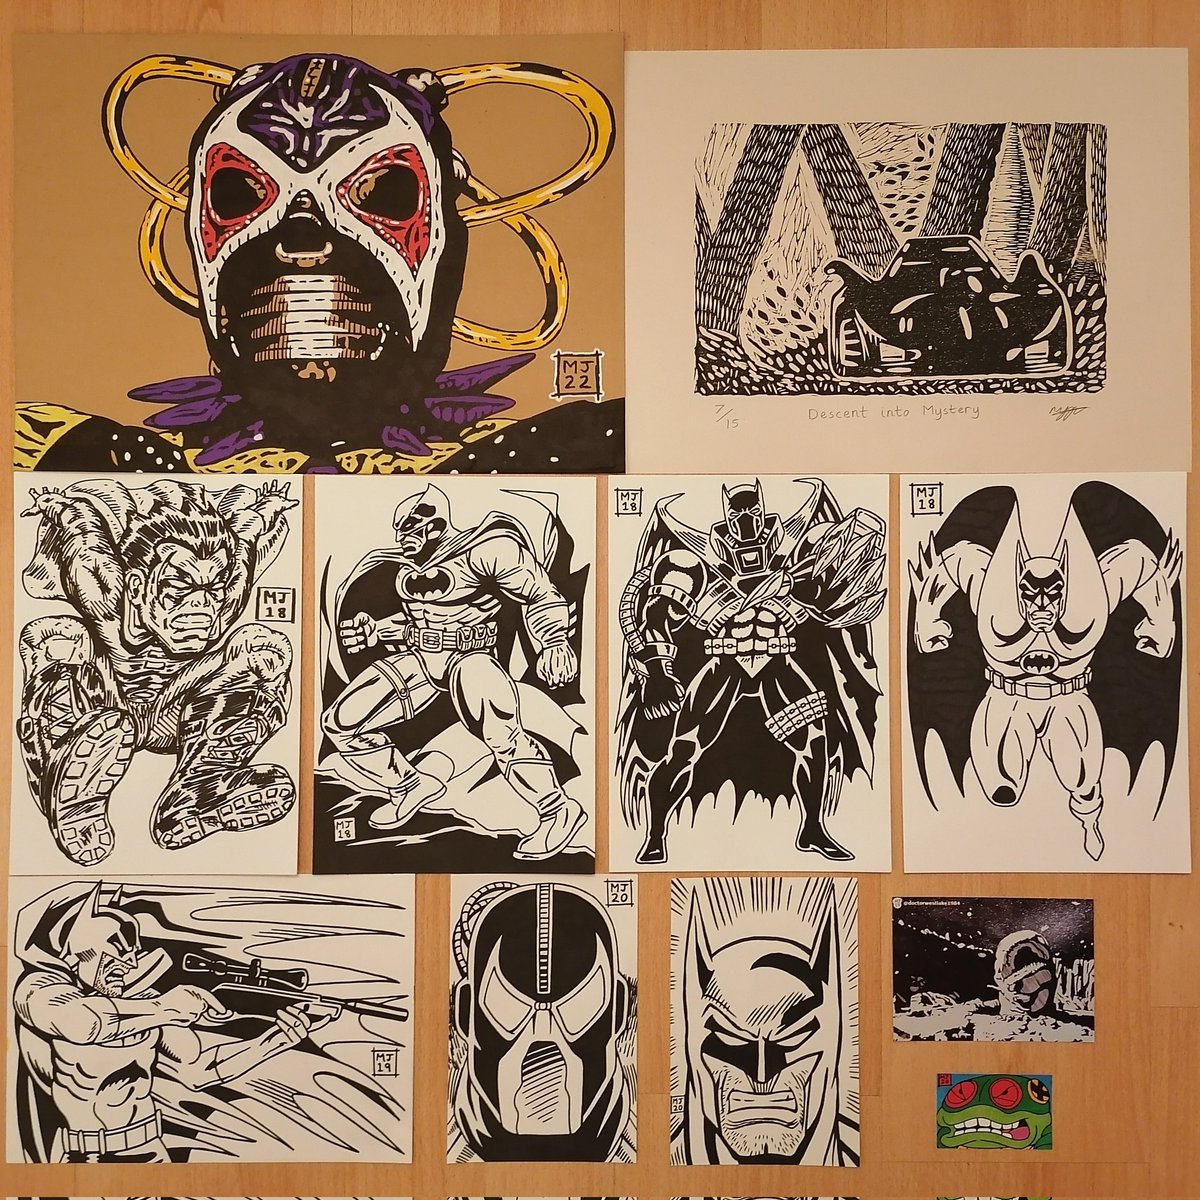 'That's more like it Mr. Wayne.'...Here is this week's swagga Bat artwork which I'll be sending out tomorrow to Wakey in Yorkshire, UK. I went for a drawing of Bane for the customised envelope. #bane #baneedit #batman #batmanandrobin #batmanandrobin1997 #darkknight #batmobile #dc